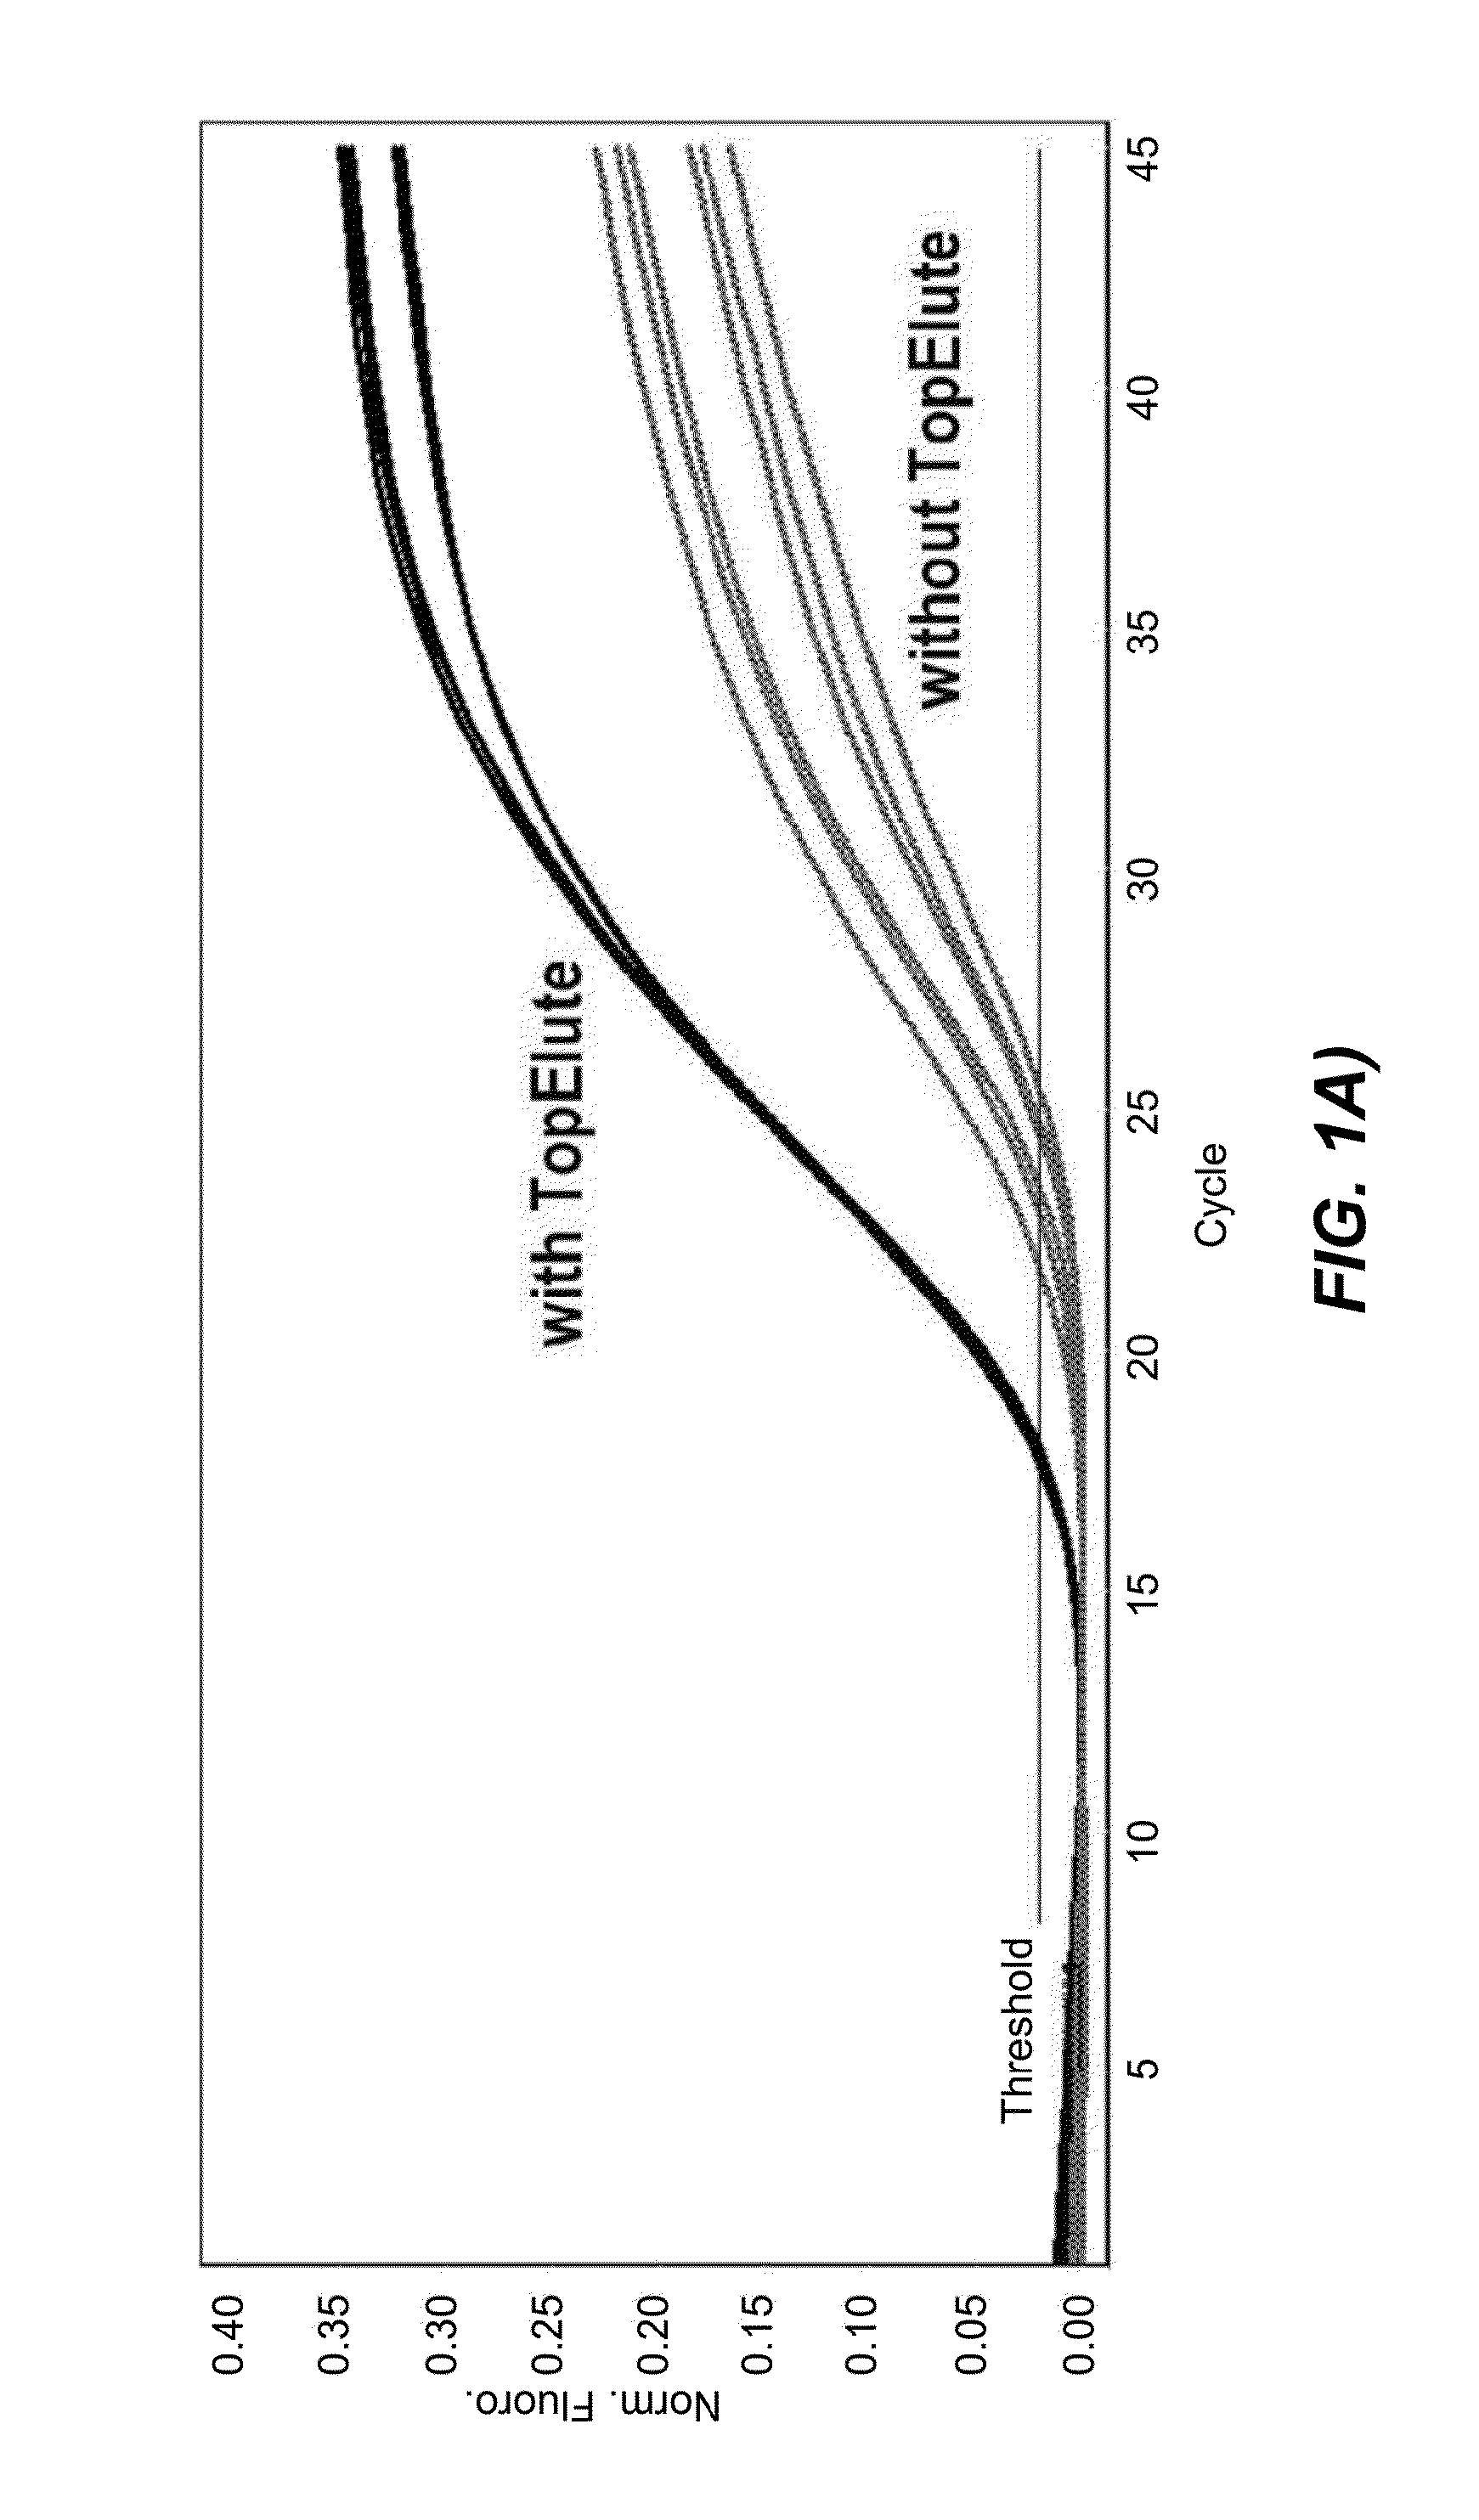 Method for isolating nucleic acids from a food sample